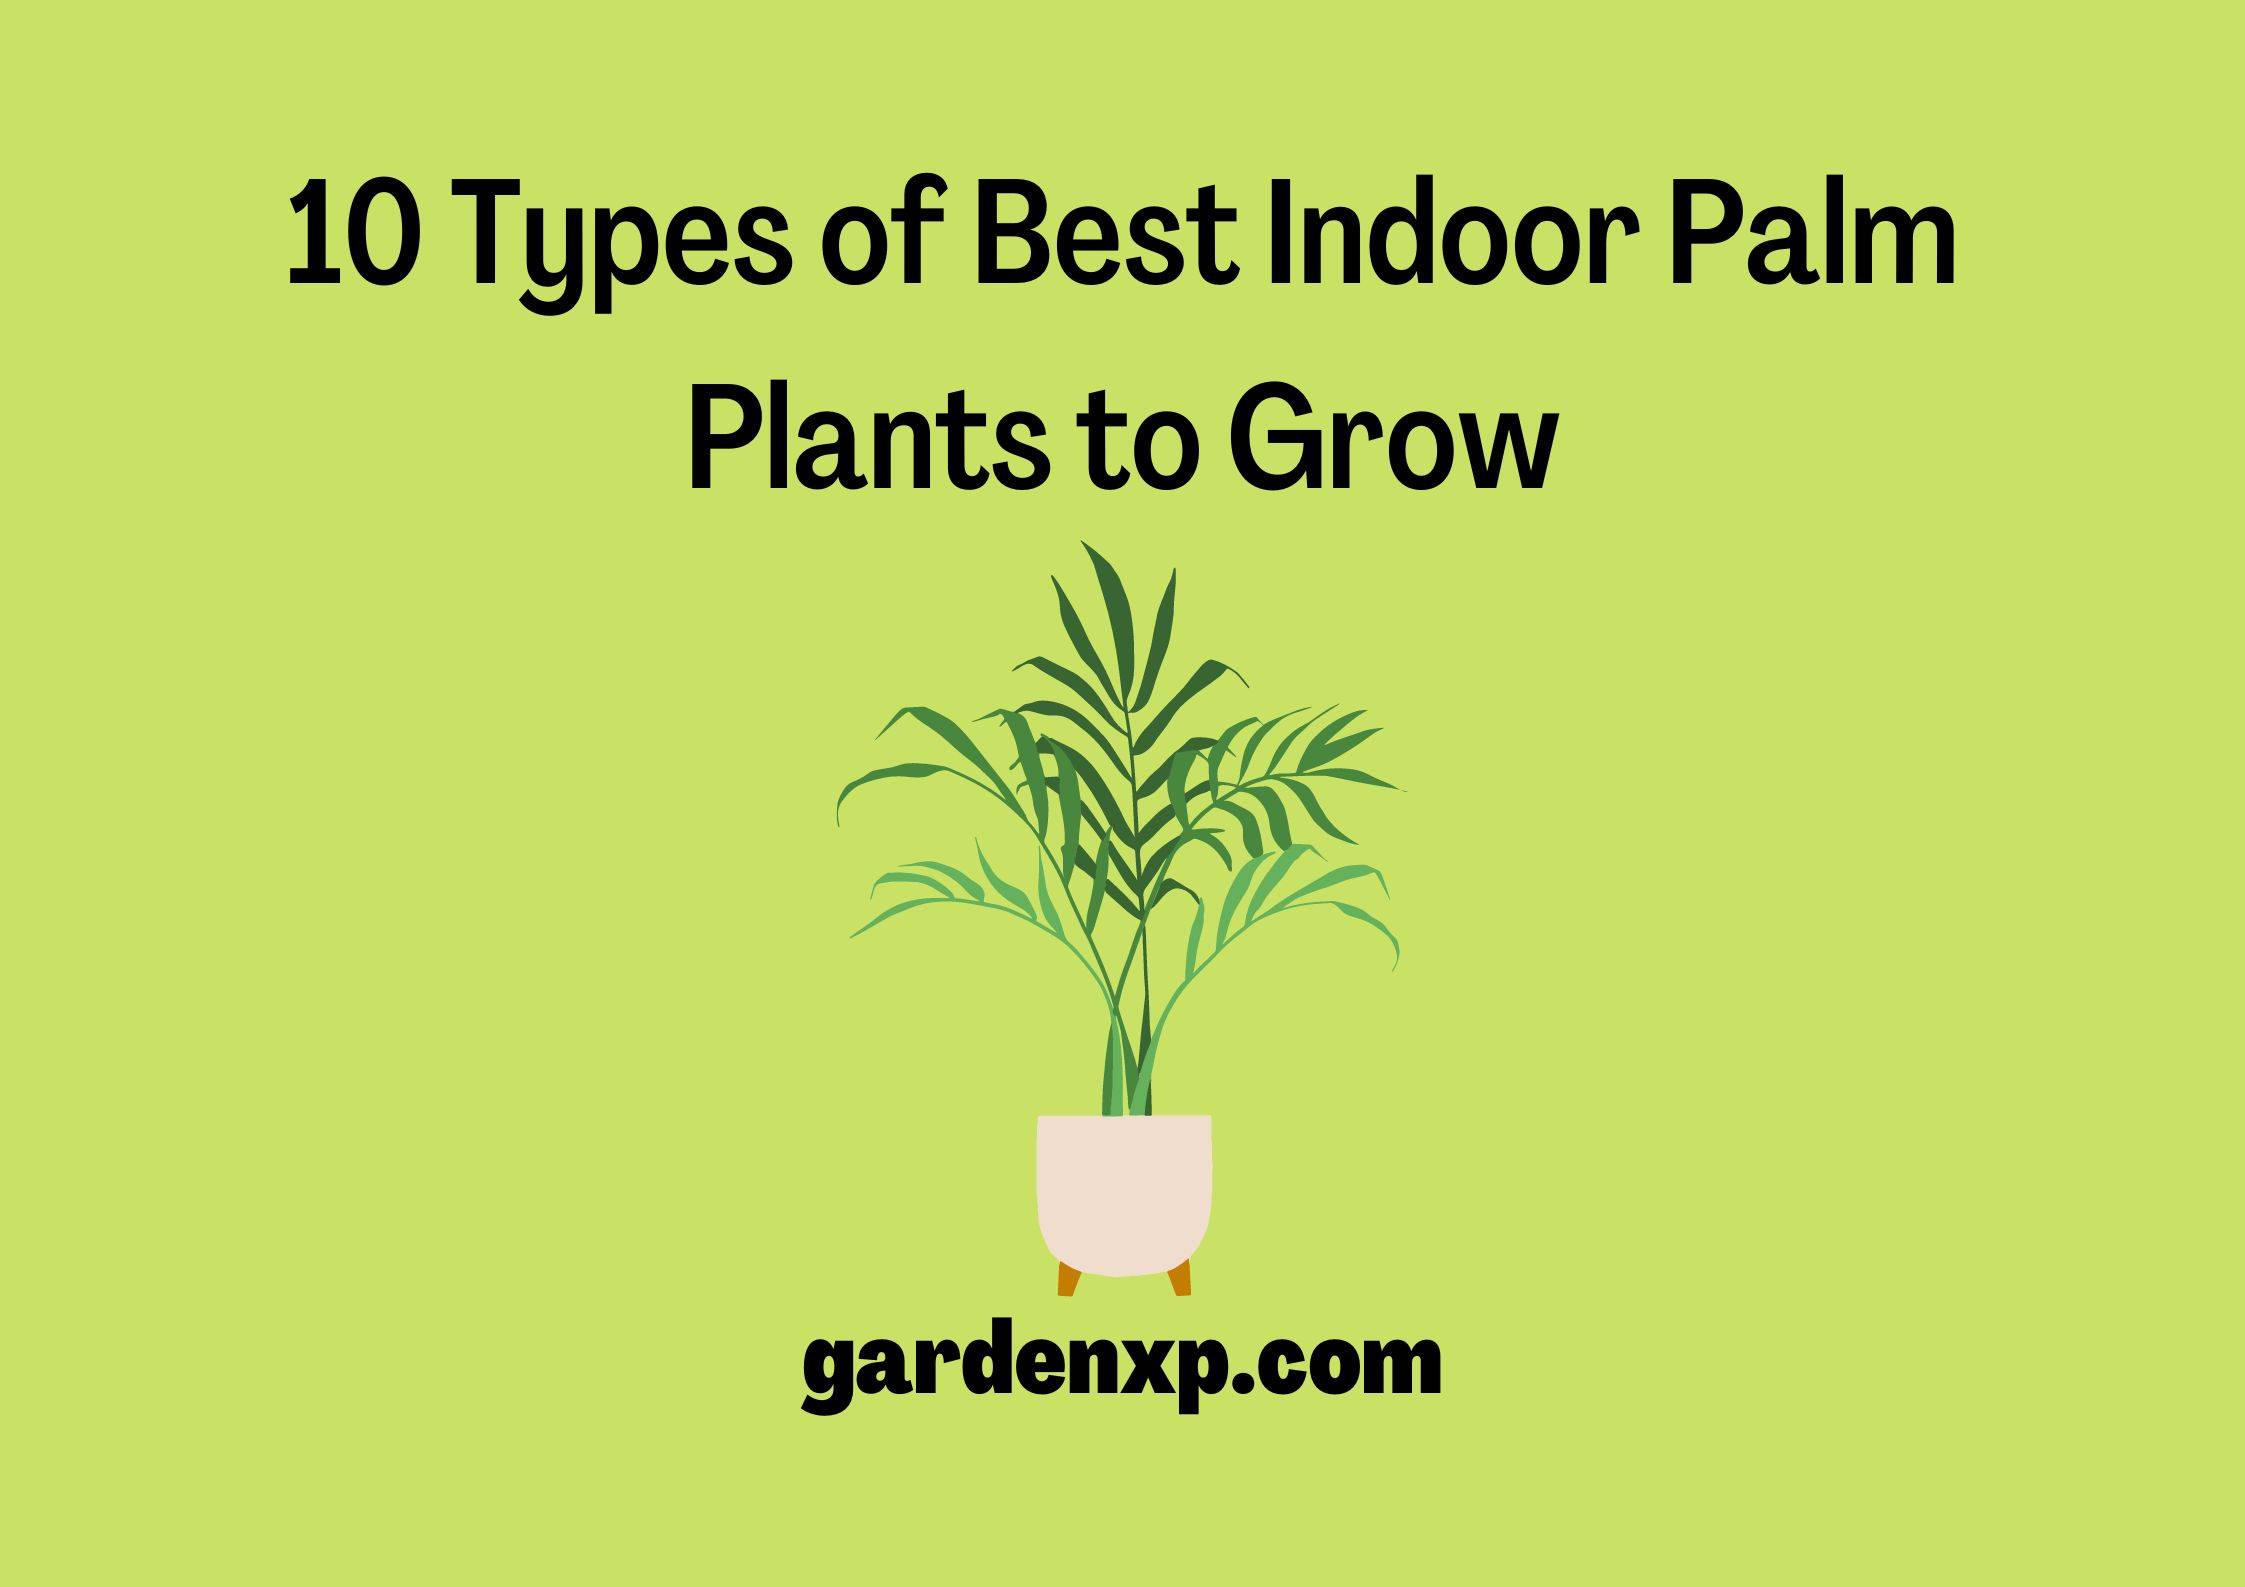 10 Types of Best Indoor Palm Plants to Grow